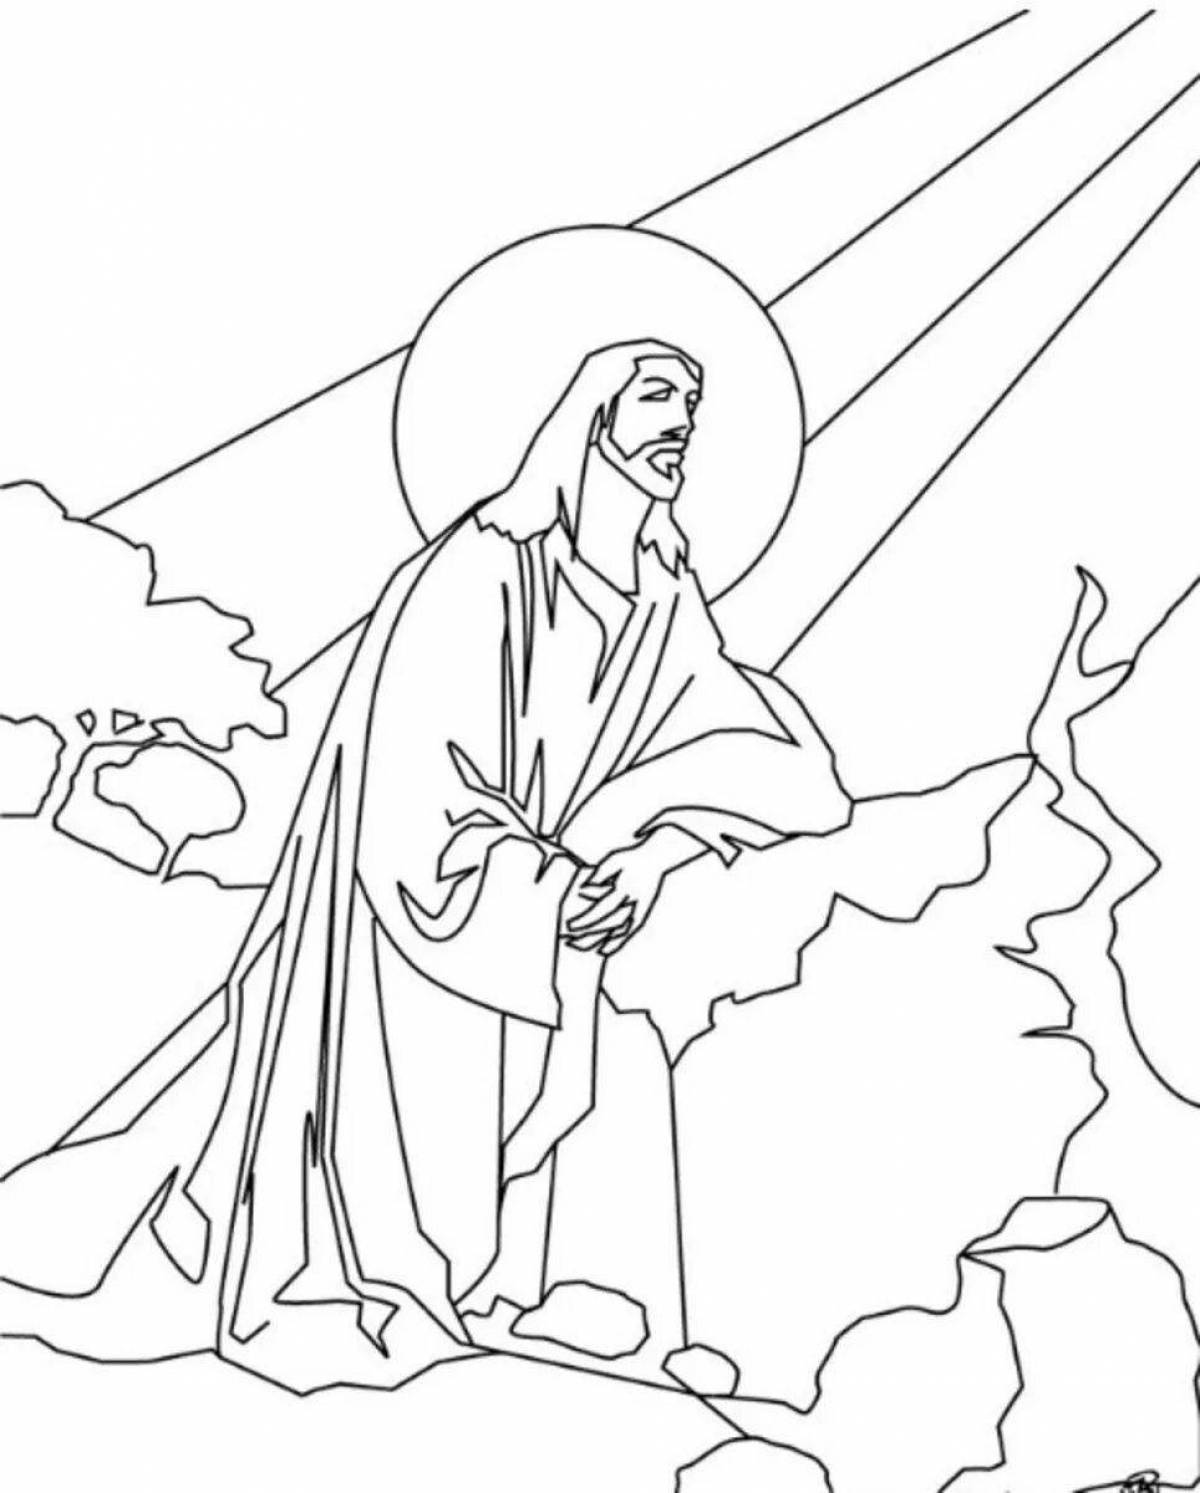 Colorful rich jesus christ coloring book